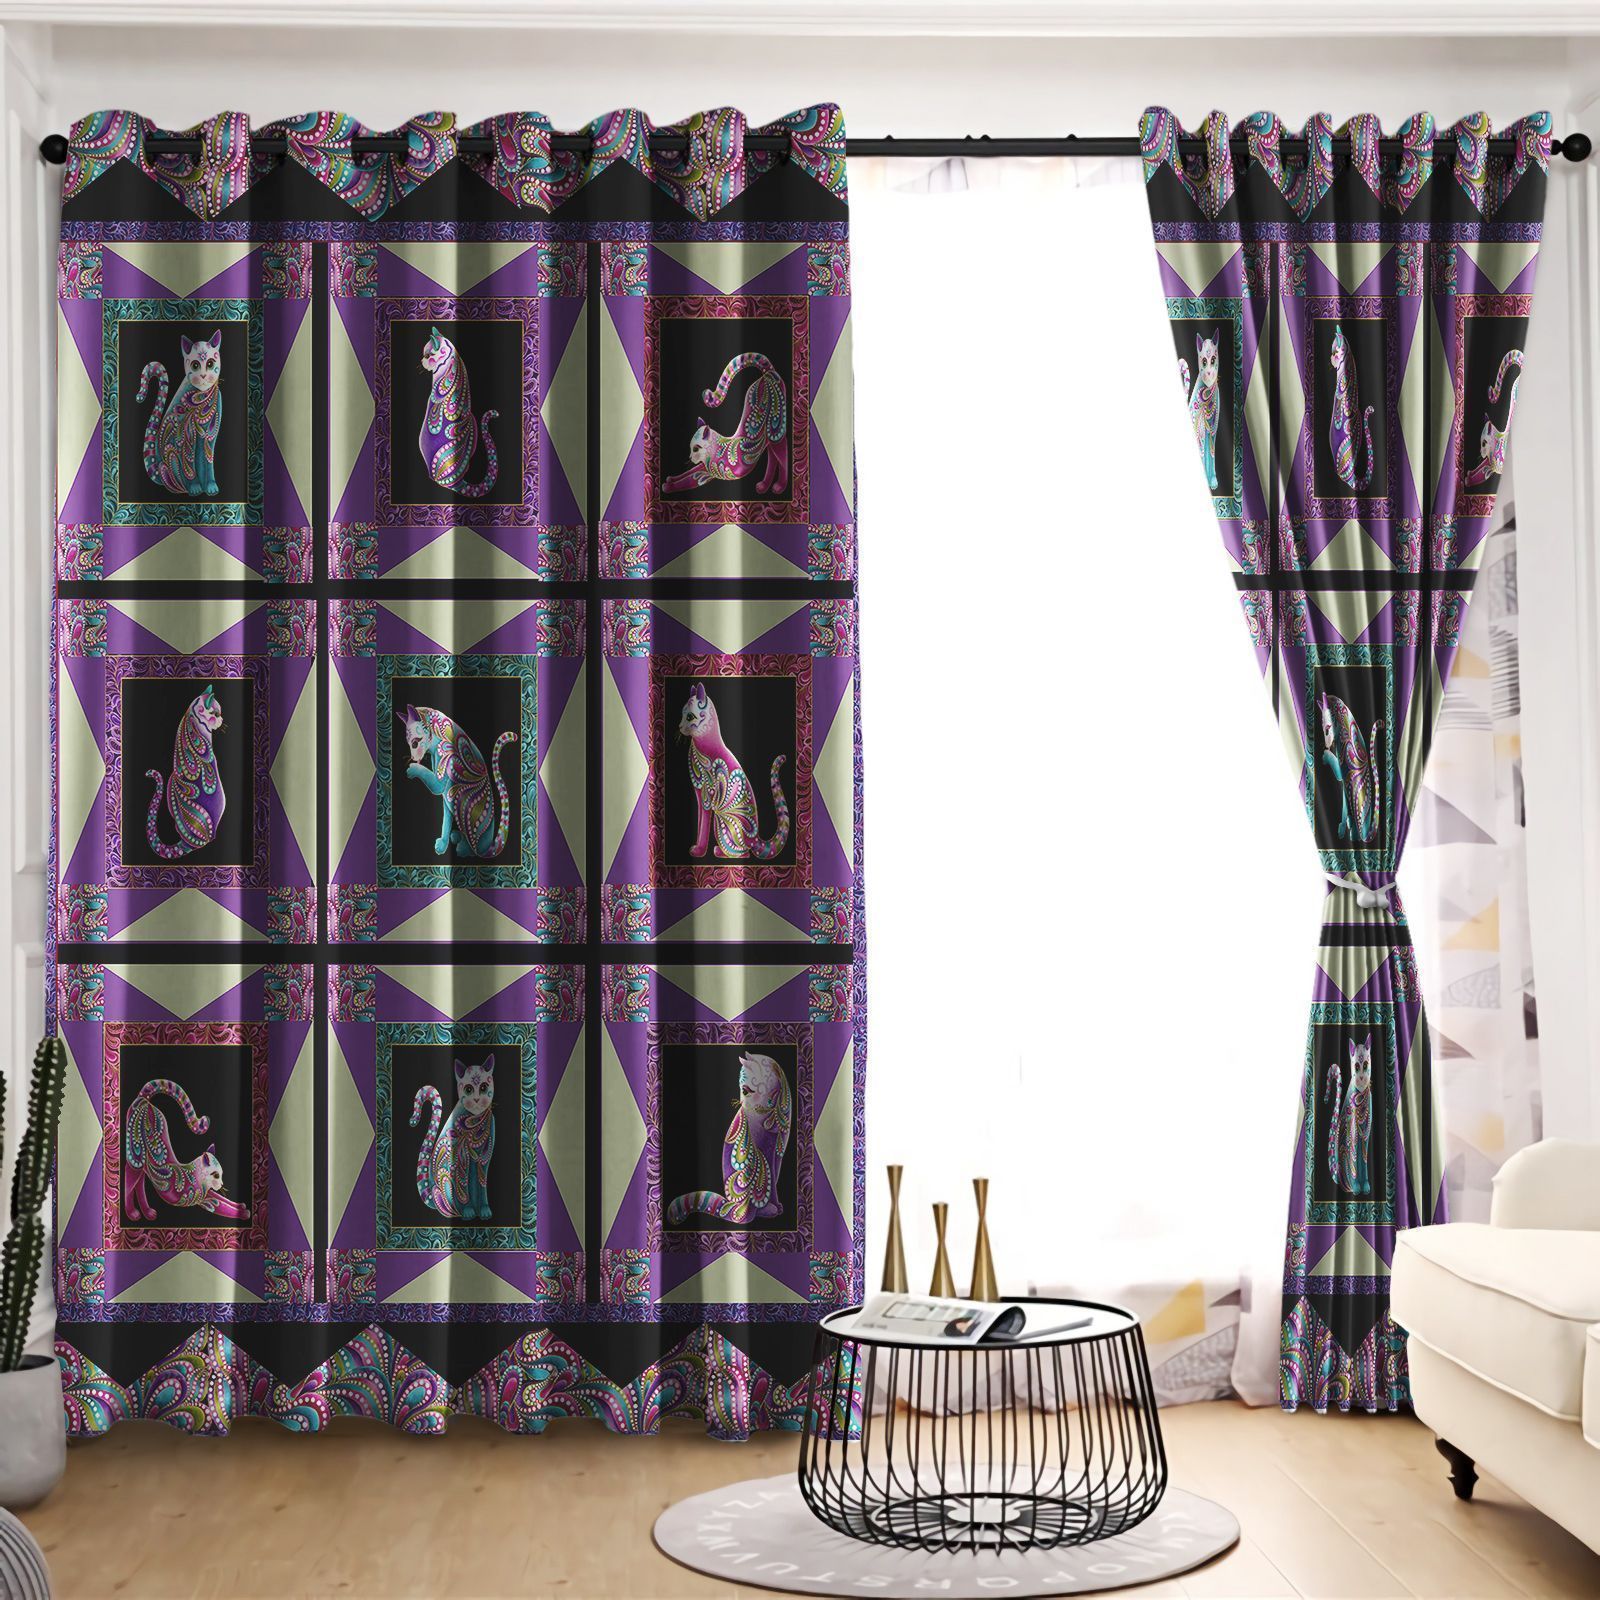 Daily Activities Of Cat Printed Window Curtain Home Decor